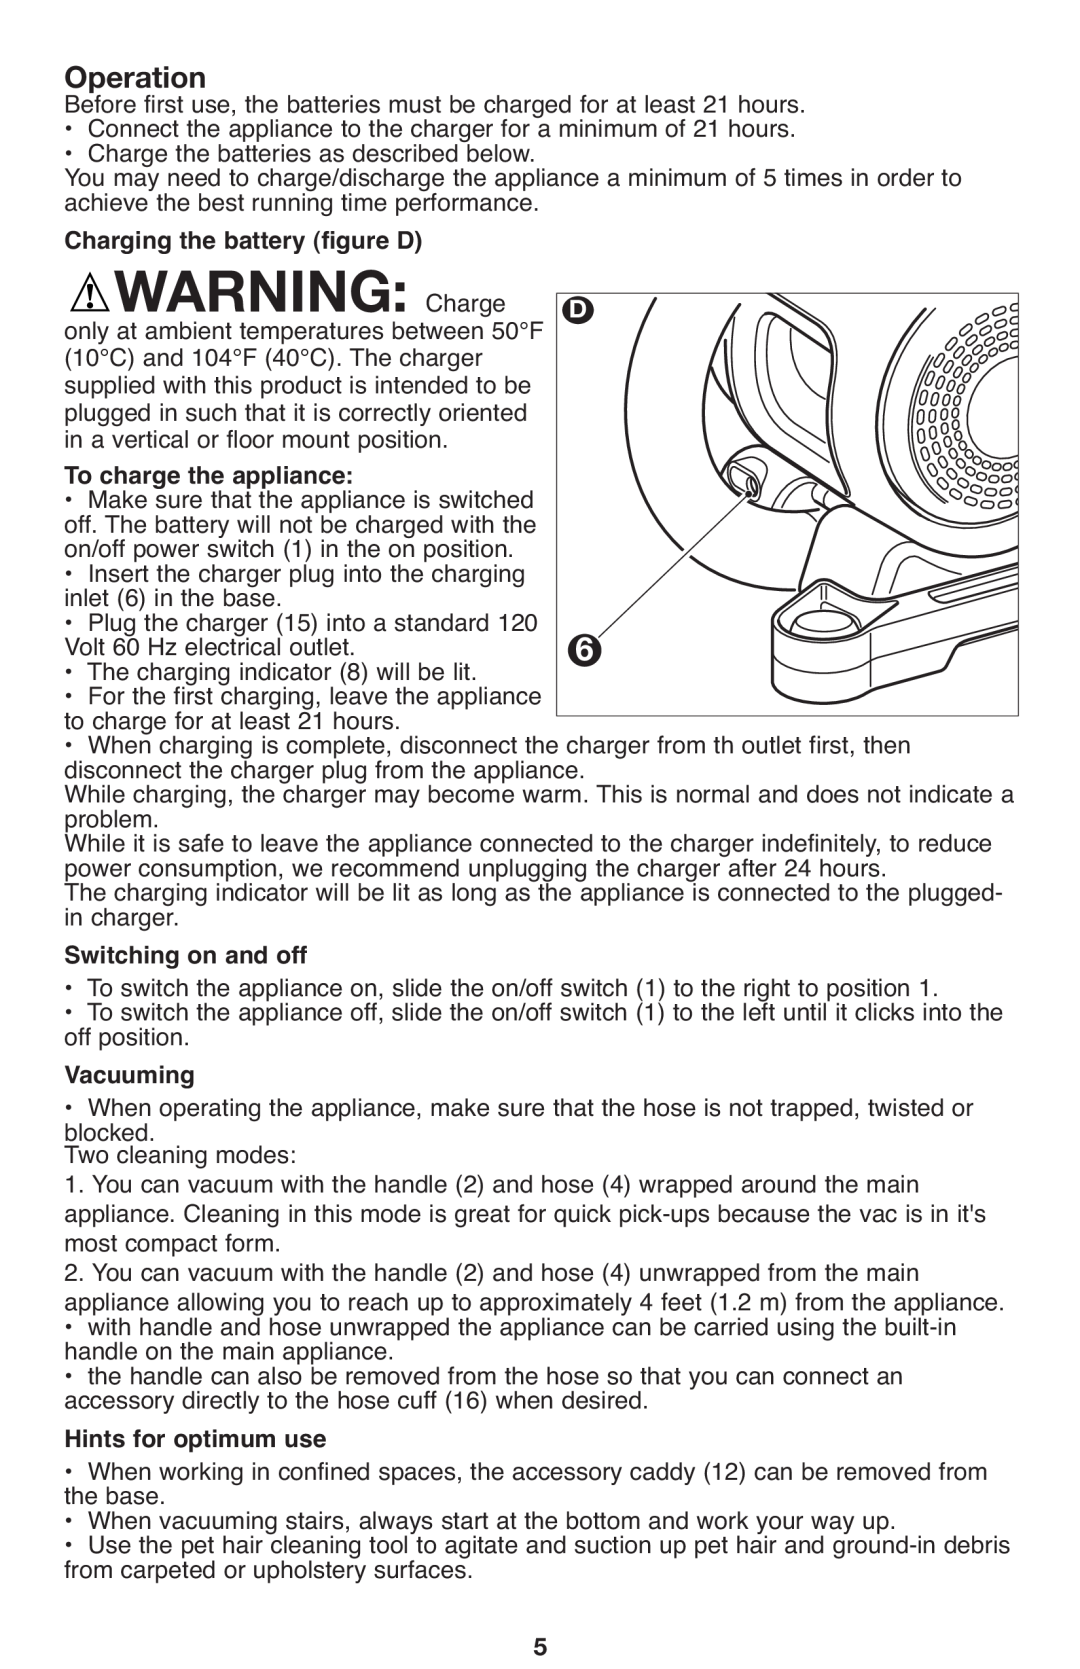 Black & Decker 90564858 manual WARNING Charge, Charging the battery figure D, To charge the appliance, Switching on and off 